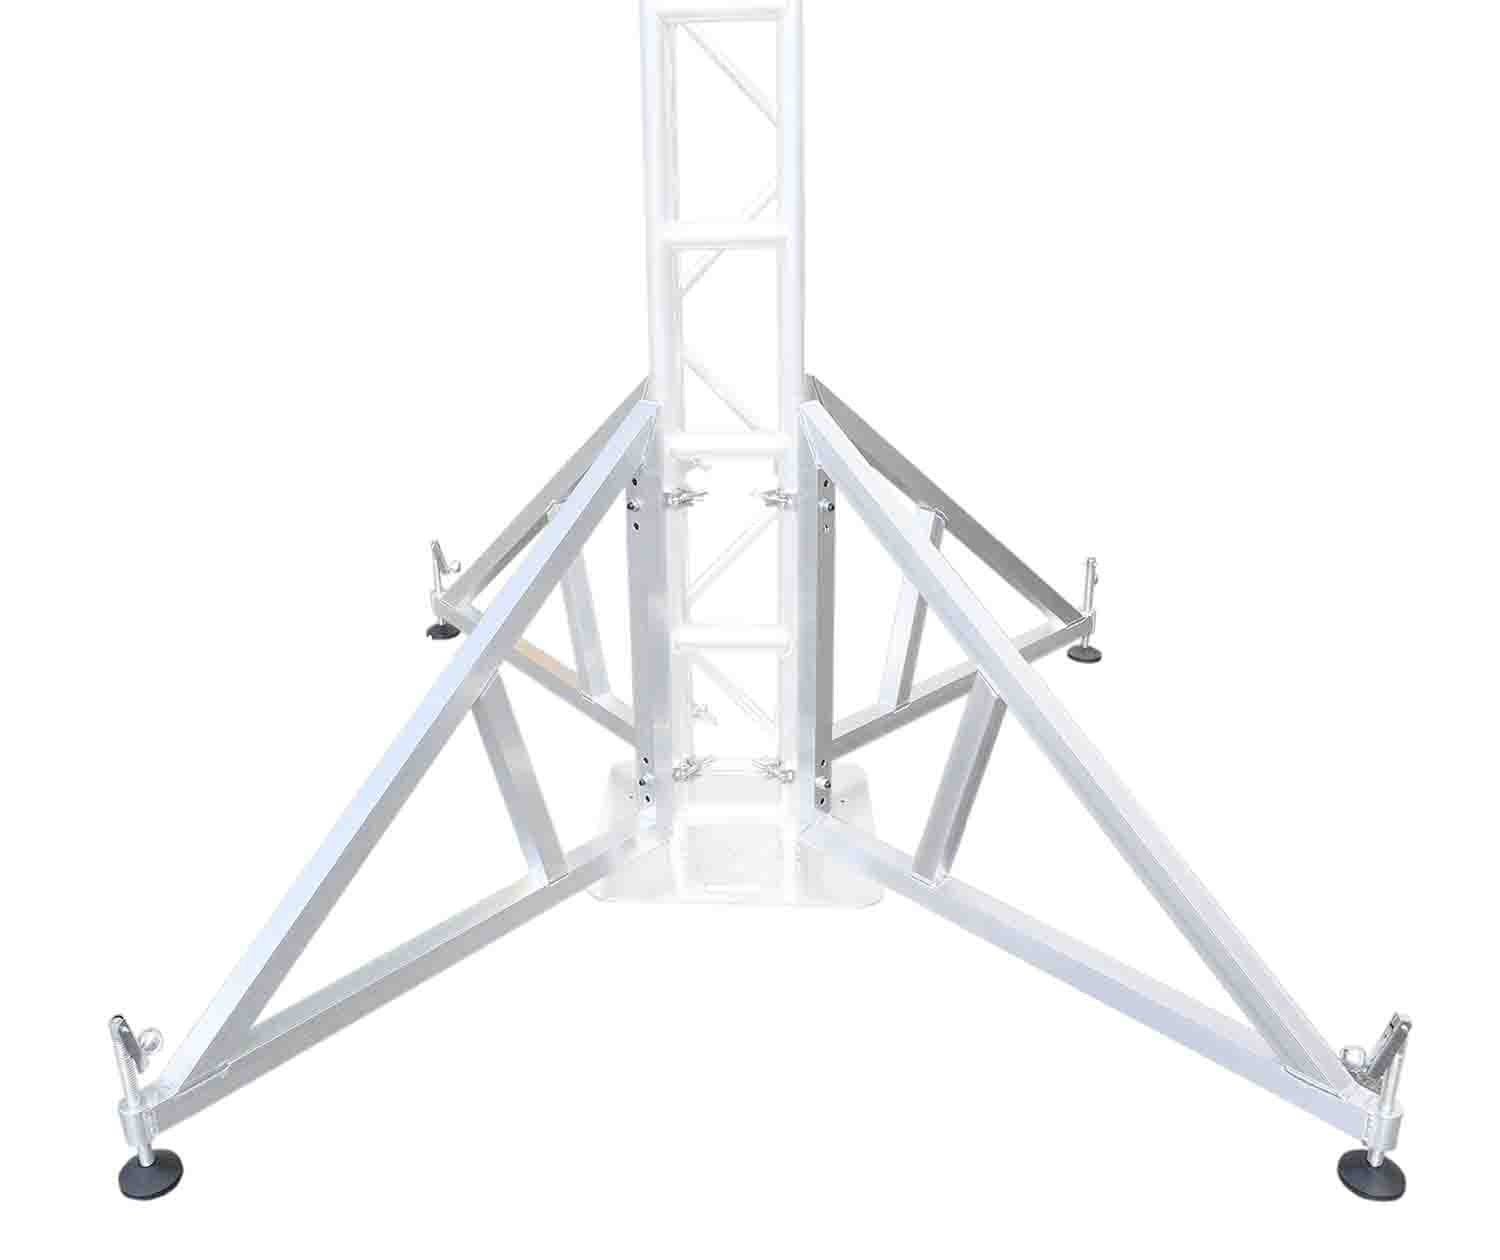 ProX XT-AC463X2 Pair of Vertical truss towers outrigger Leg Stabilizers with 2 clamps for F34 and 12" Bolted Truss 2" Pipe Diameter - Hollywood DJ